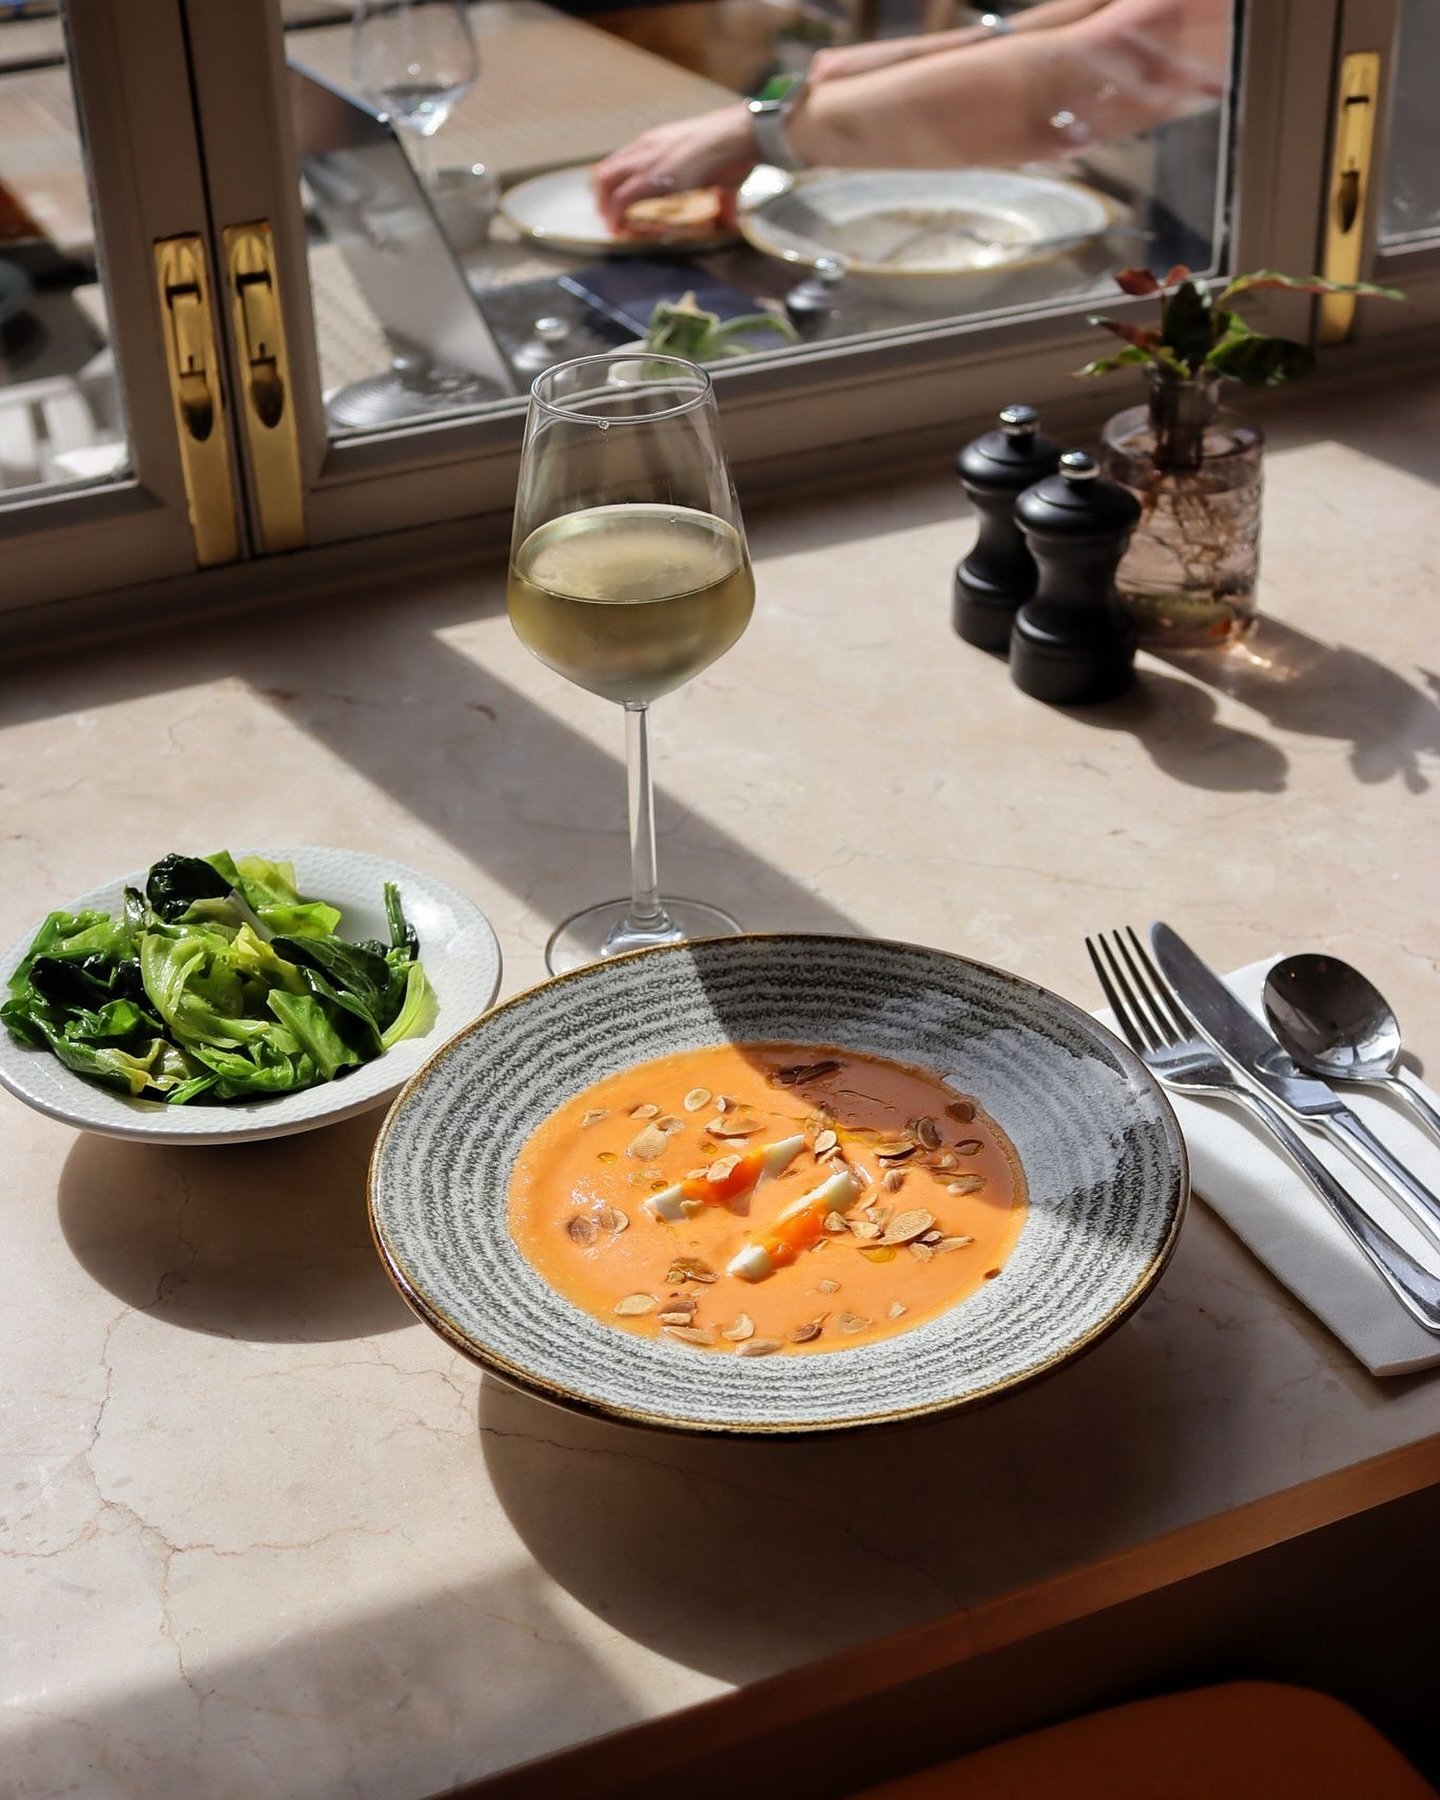 Lunch for one never looked so good ☀️ Our new Salmorejo - chilled tomato soup with a hard-boiled egg &amp; almonds - the perfect spring starter or main served with a side of seasonal greens.
.
.
.
.
#EnglandsGrace #londonrestaurants #londonlife #lond